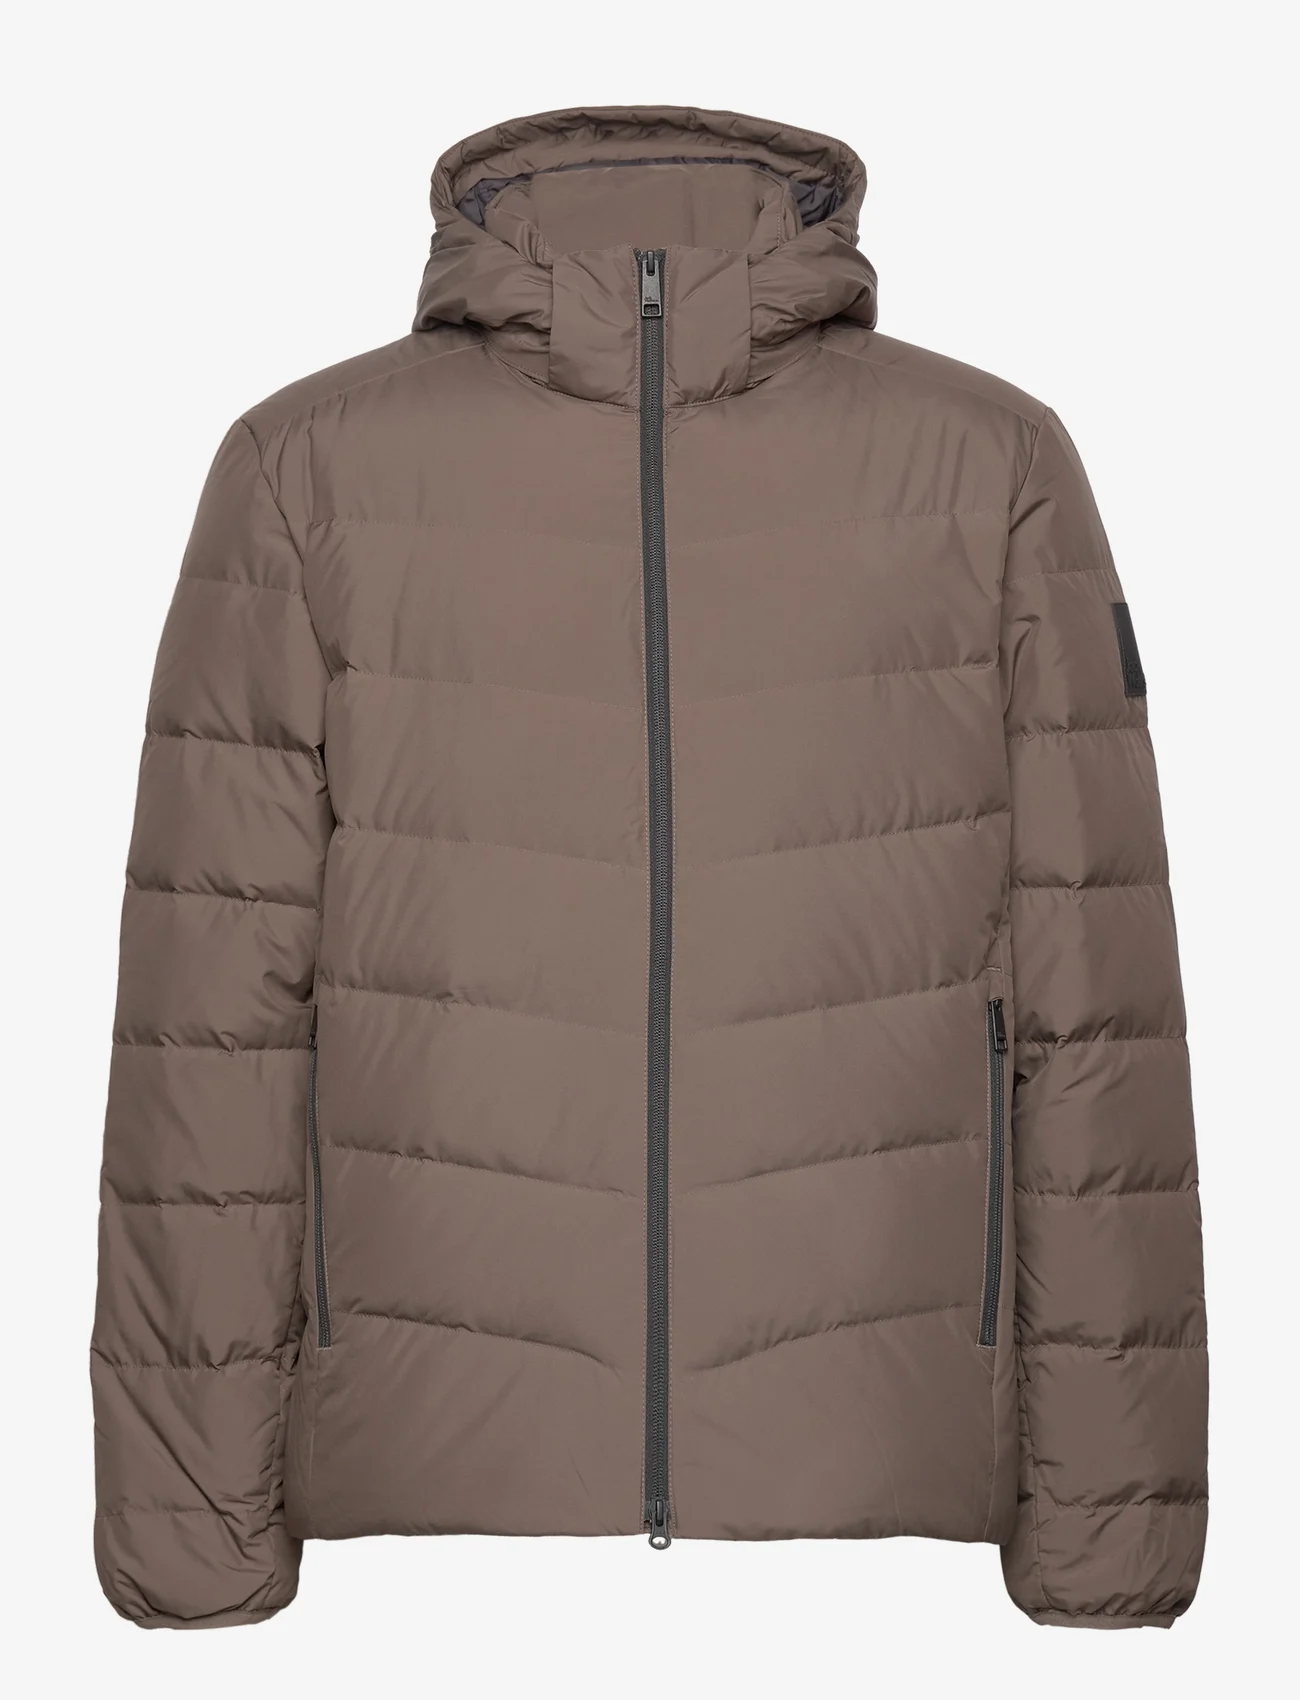 Jack Wolfskin - COLONIUS JKT M - padded jackets - cold coffee - 0